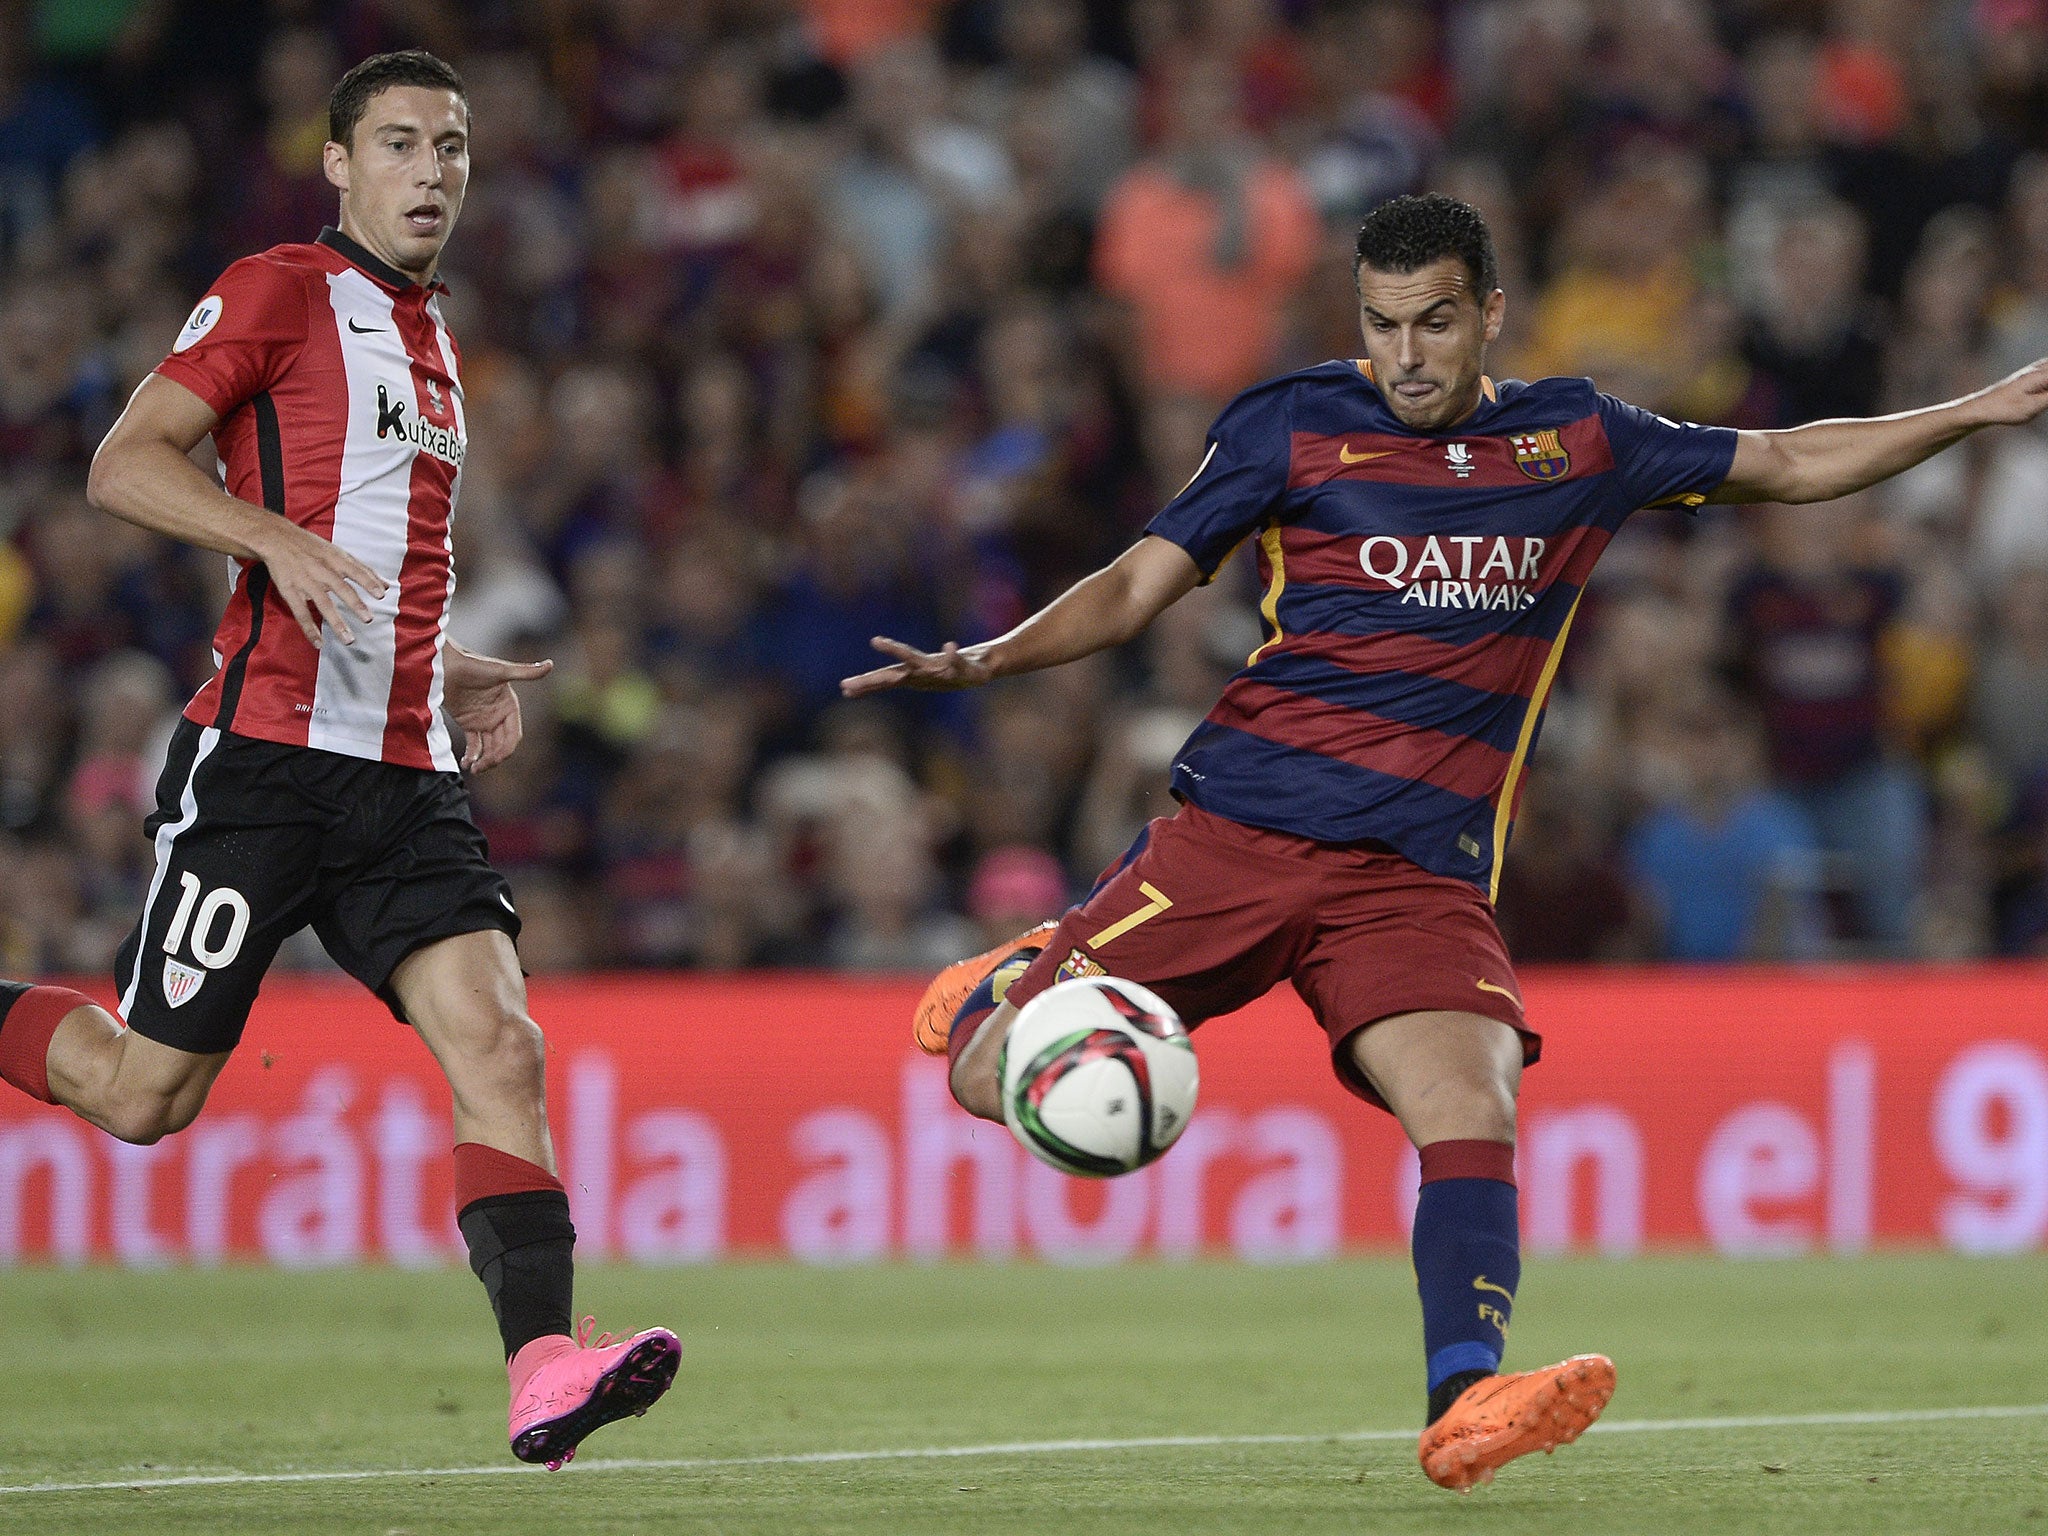 Pedro in action for Barcelona in the Super Cup against Atletico Bilbao this week